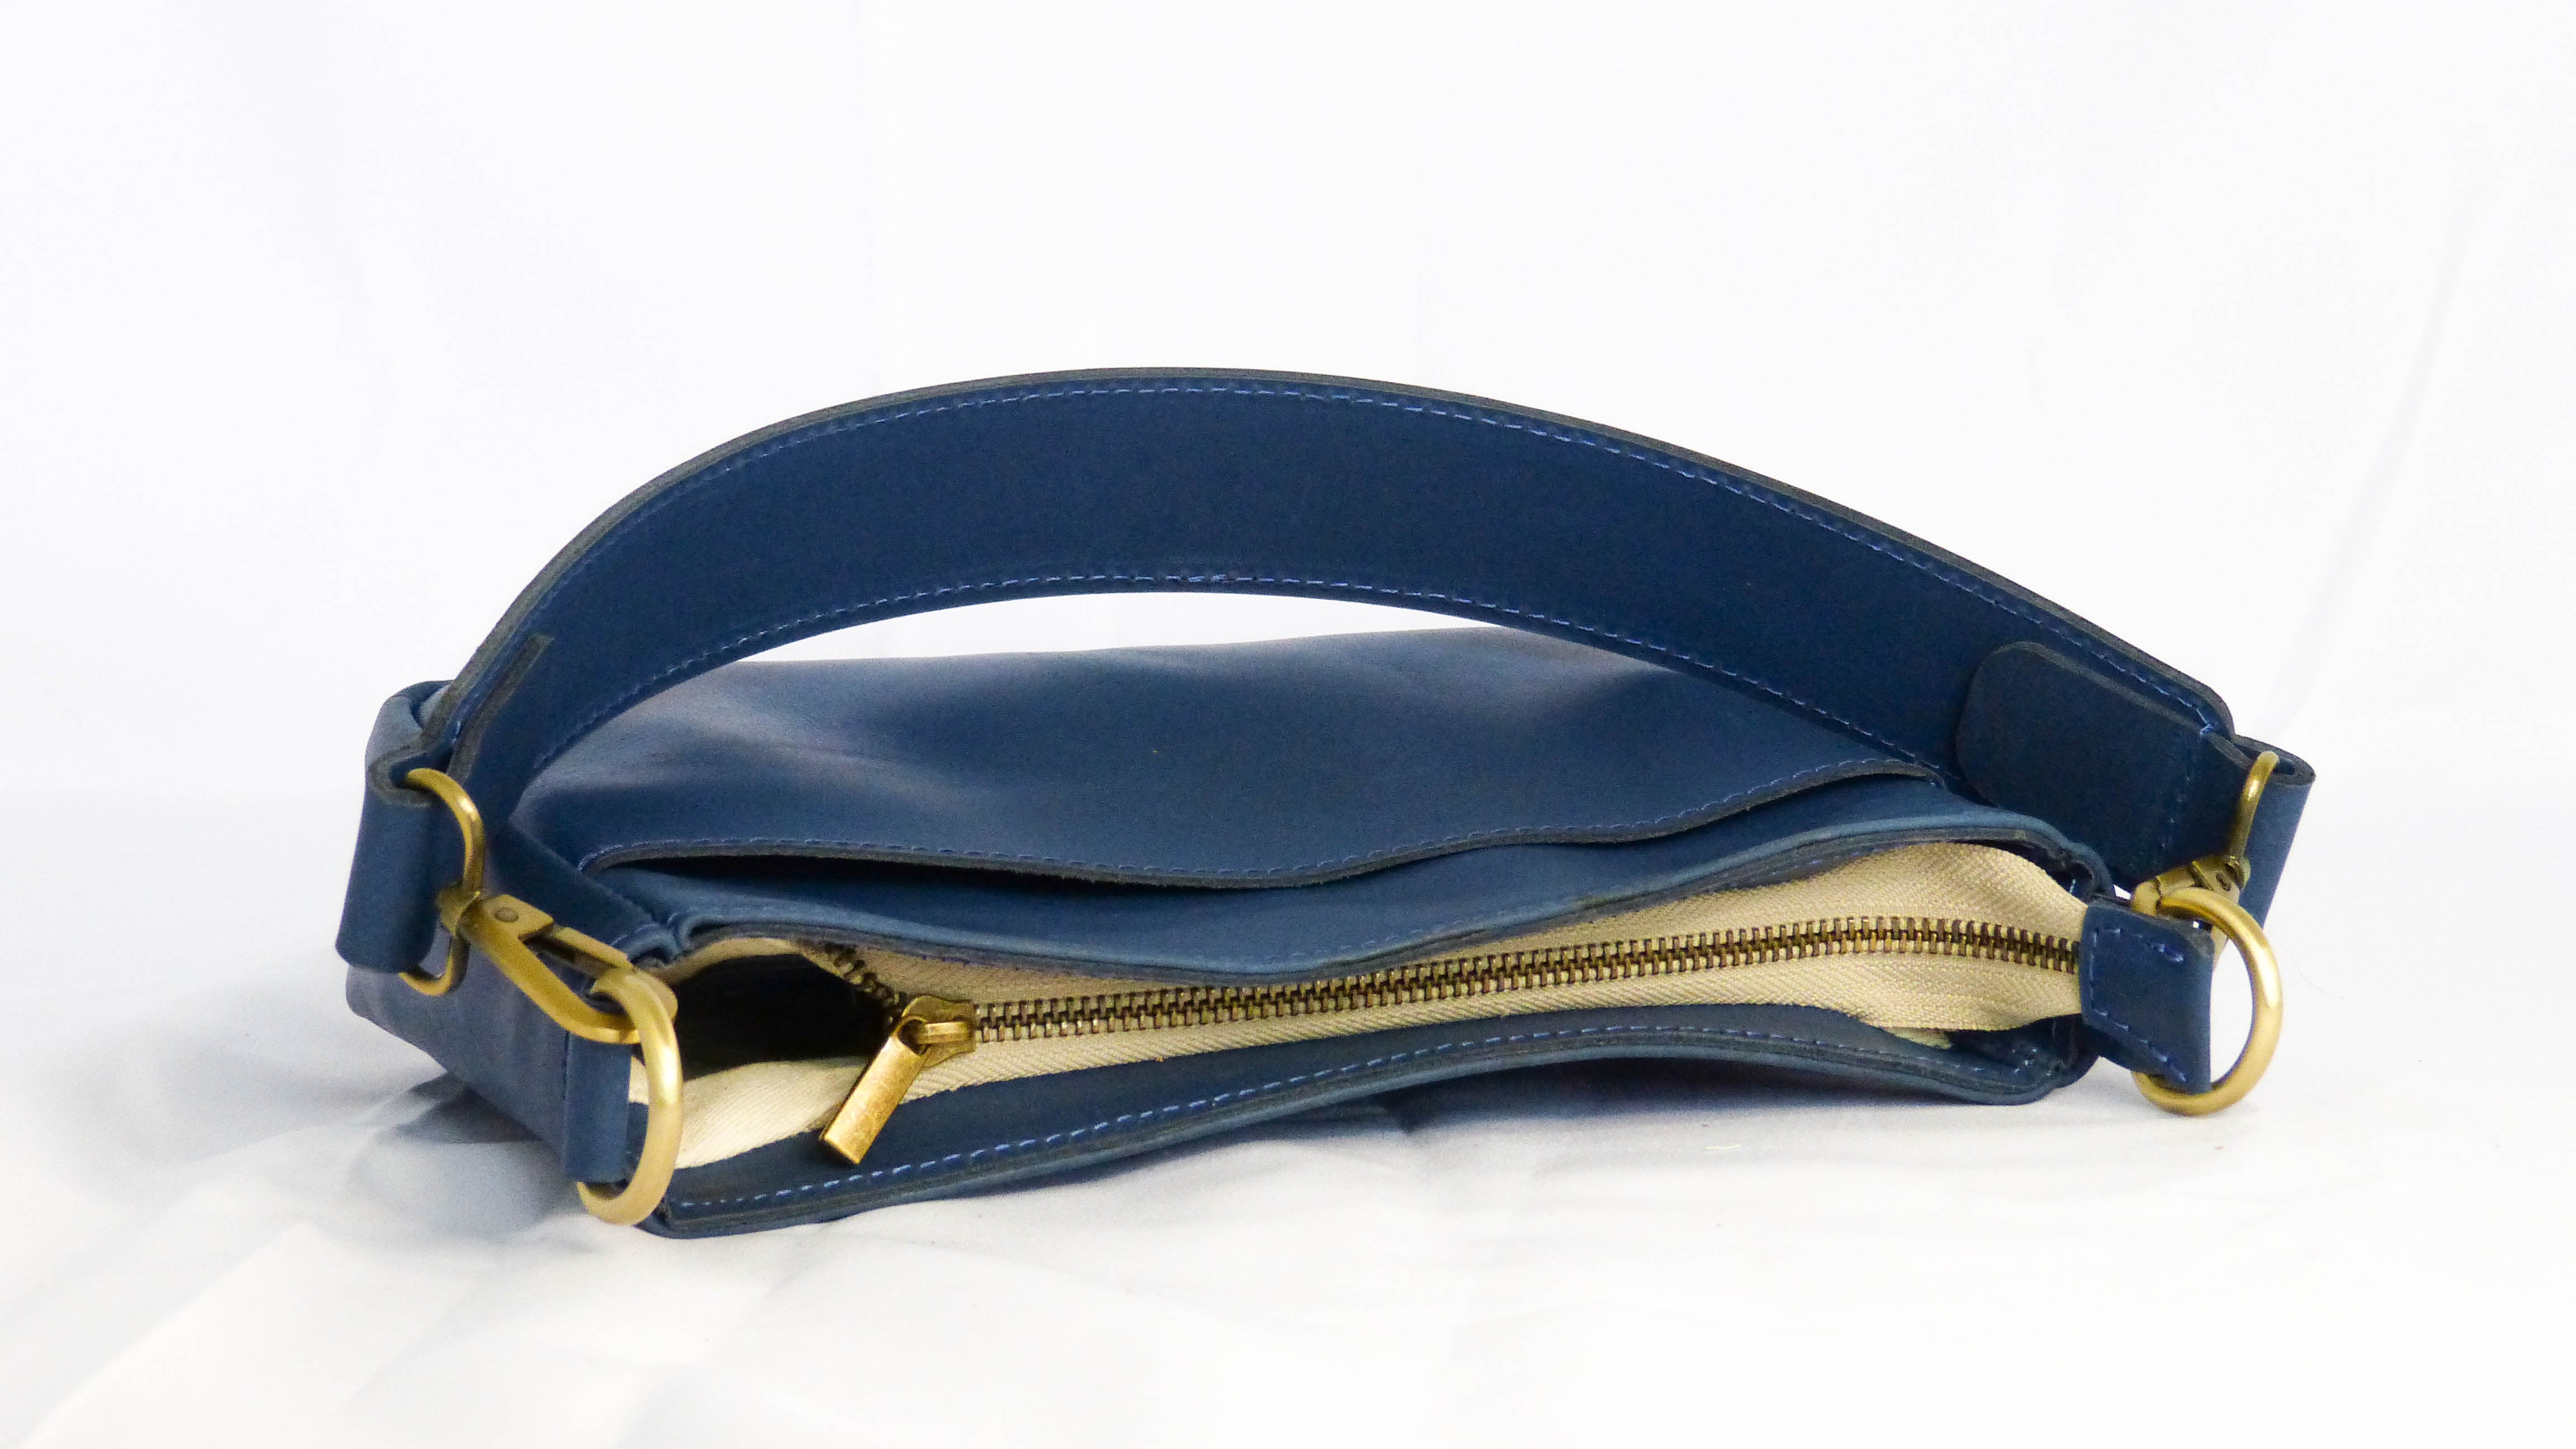 A close-up of the Jessica Leather Purse in Cornflower Blue, showcasing a gold zipper and removable strap. Handmade by artisans in Ethiopia, featuring a zippered top and inside pocket.